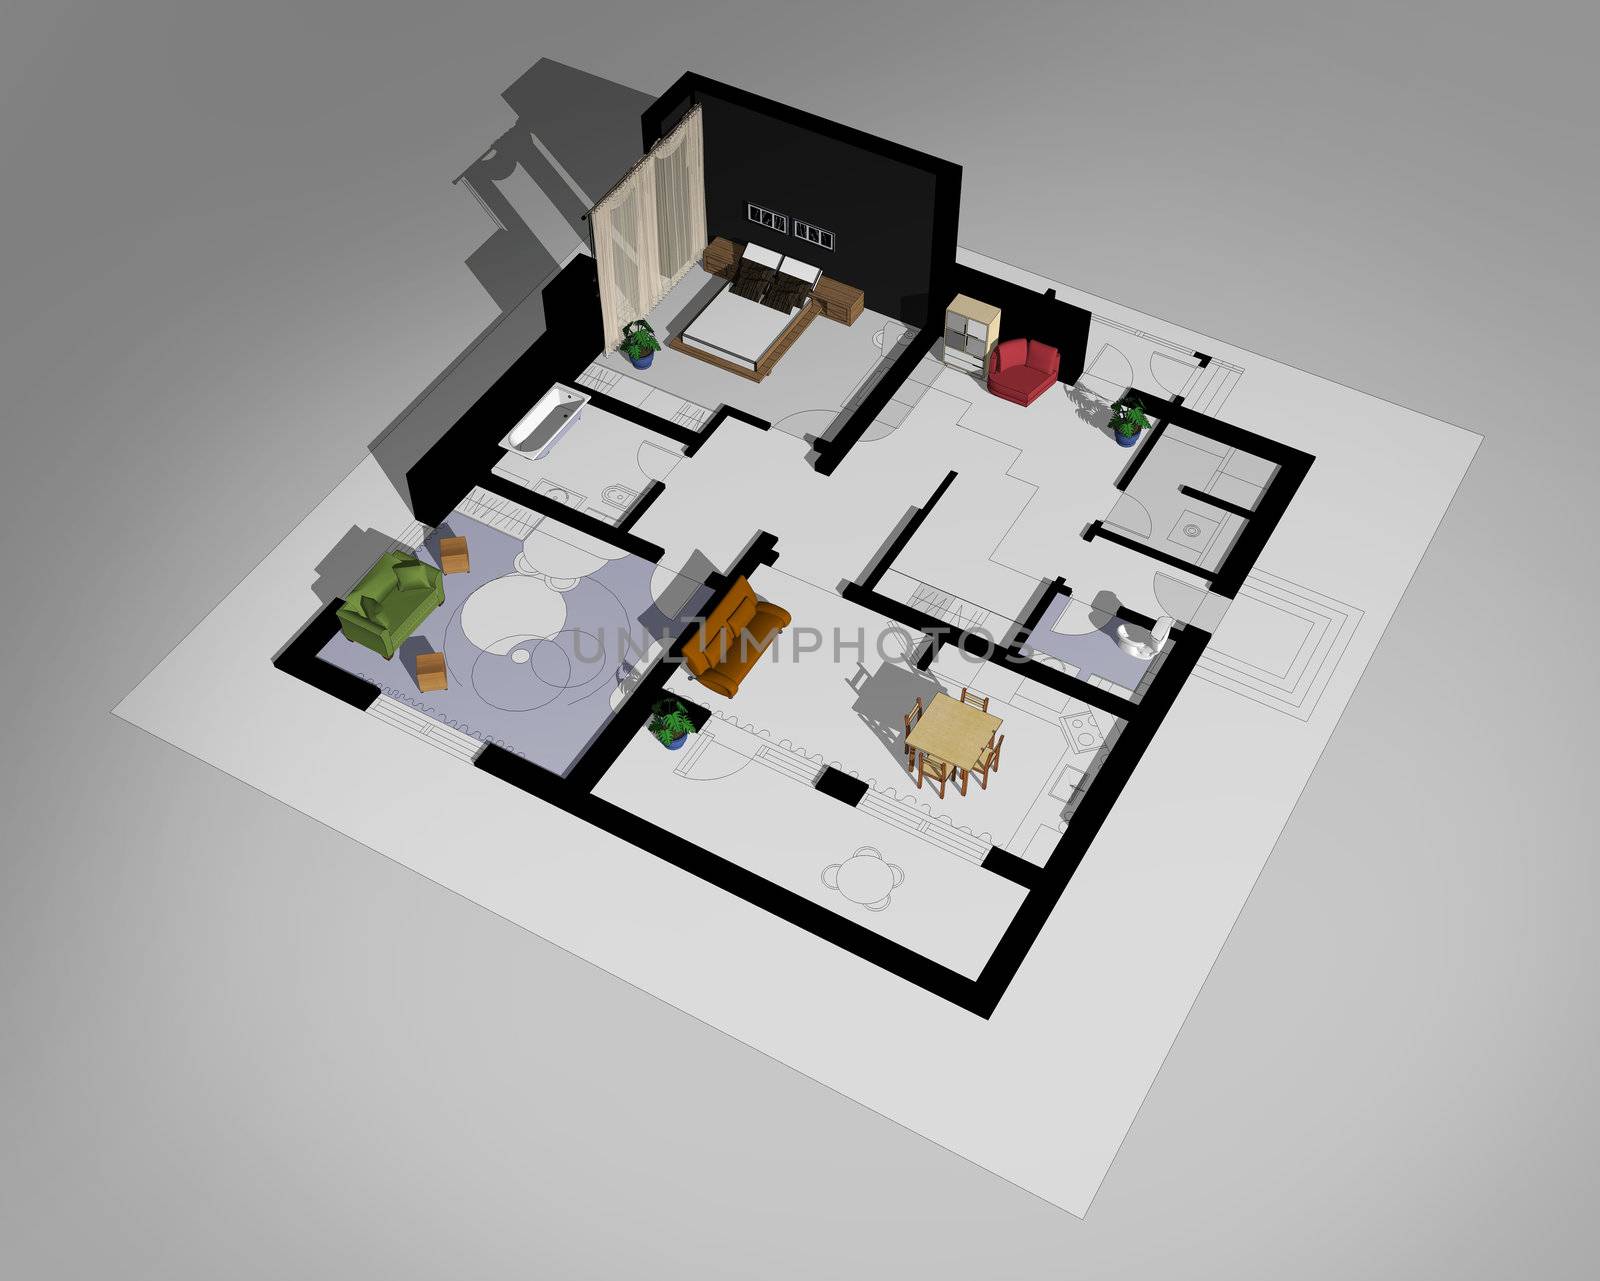 layout of the apartment by butenkow